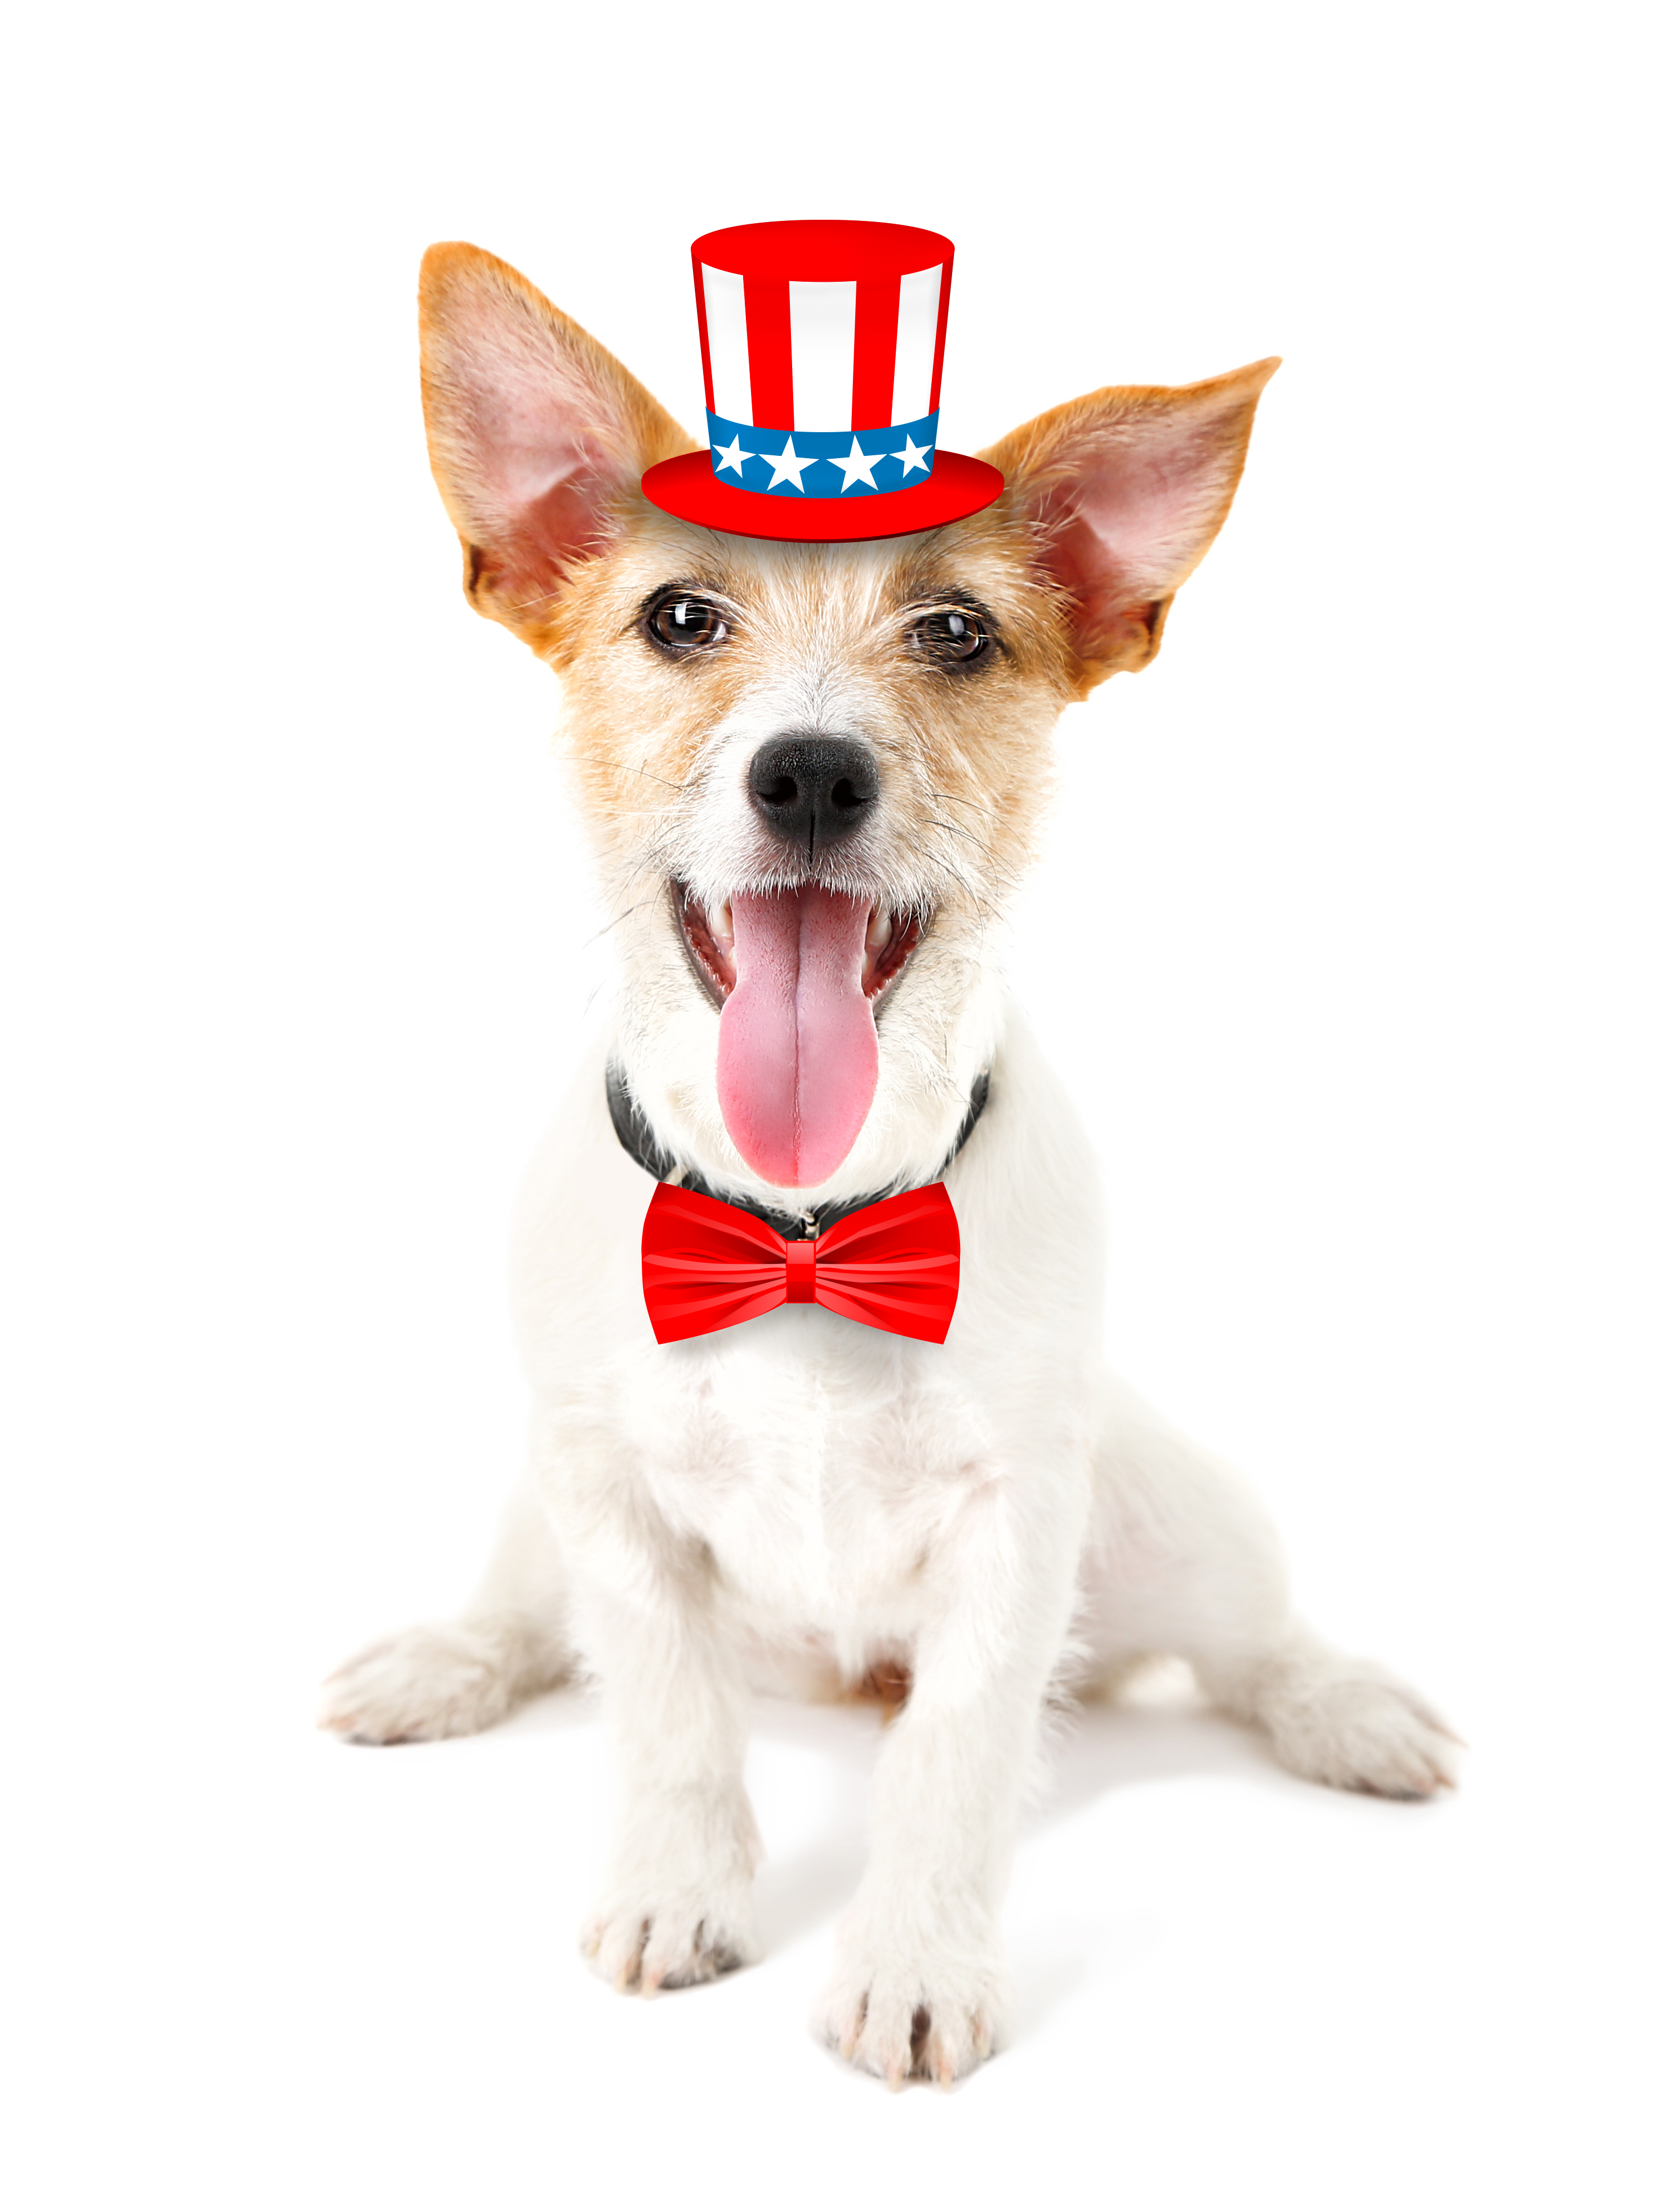 https://depositphotos.com/126326578/stock-photo-cute-dog-with-uncle-sam.html